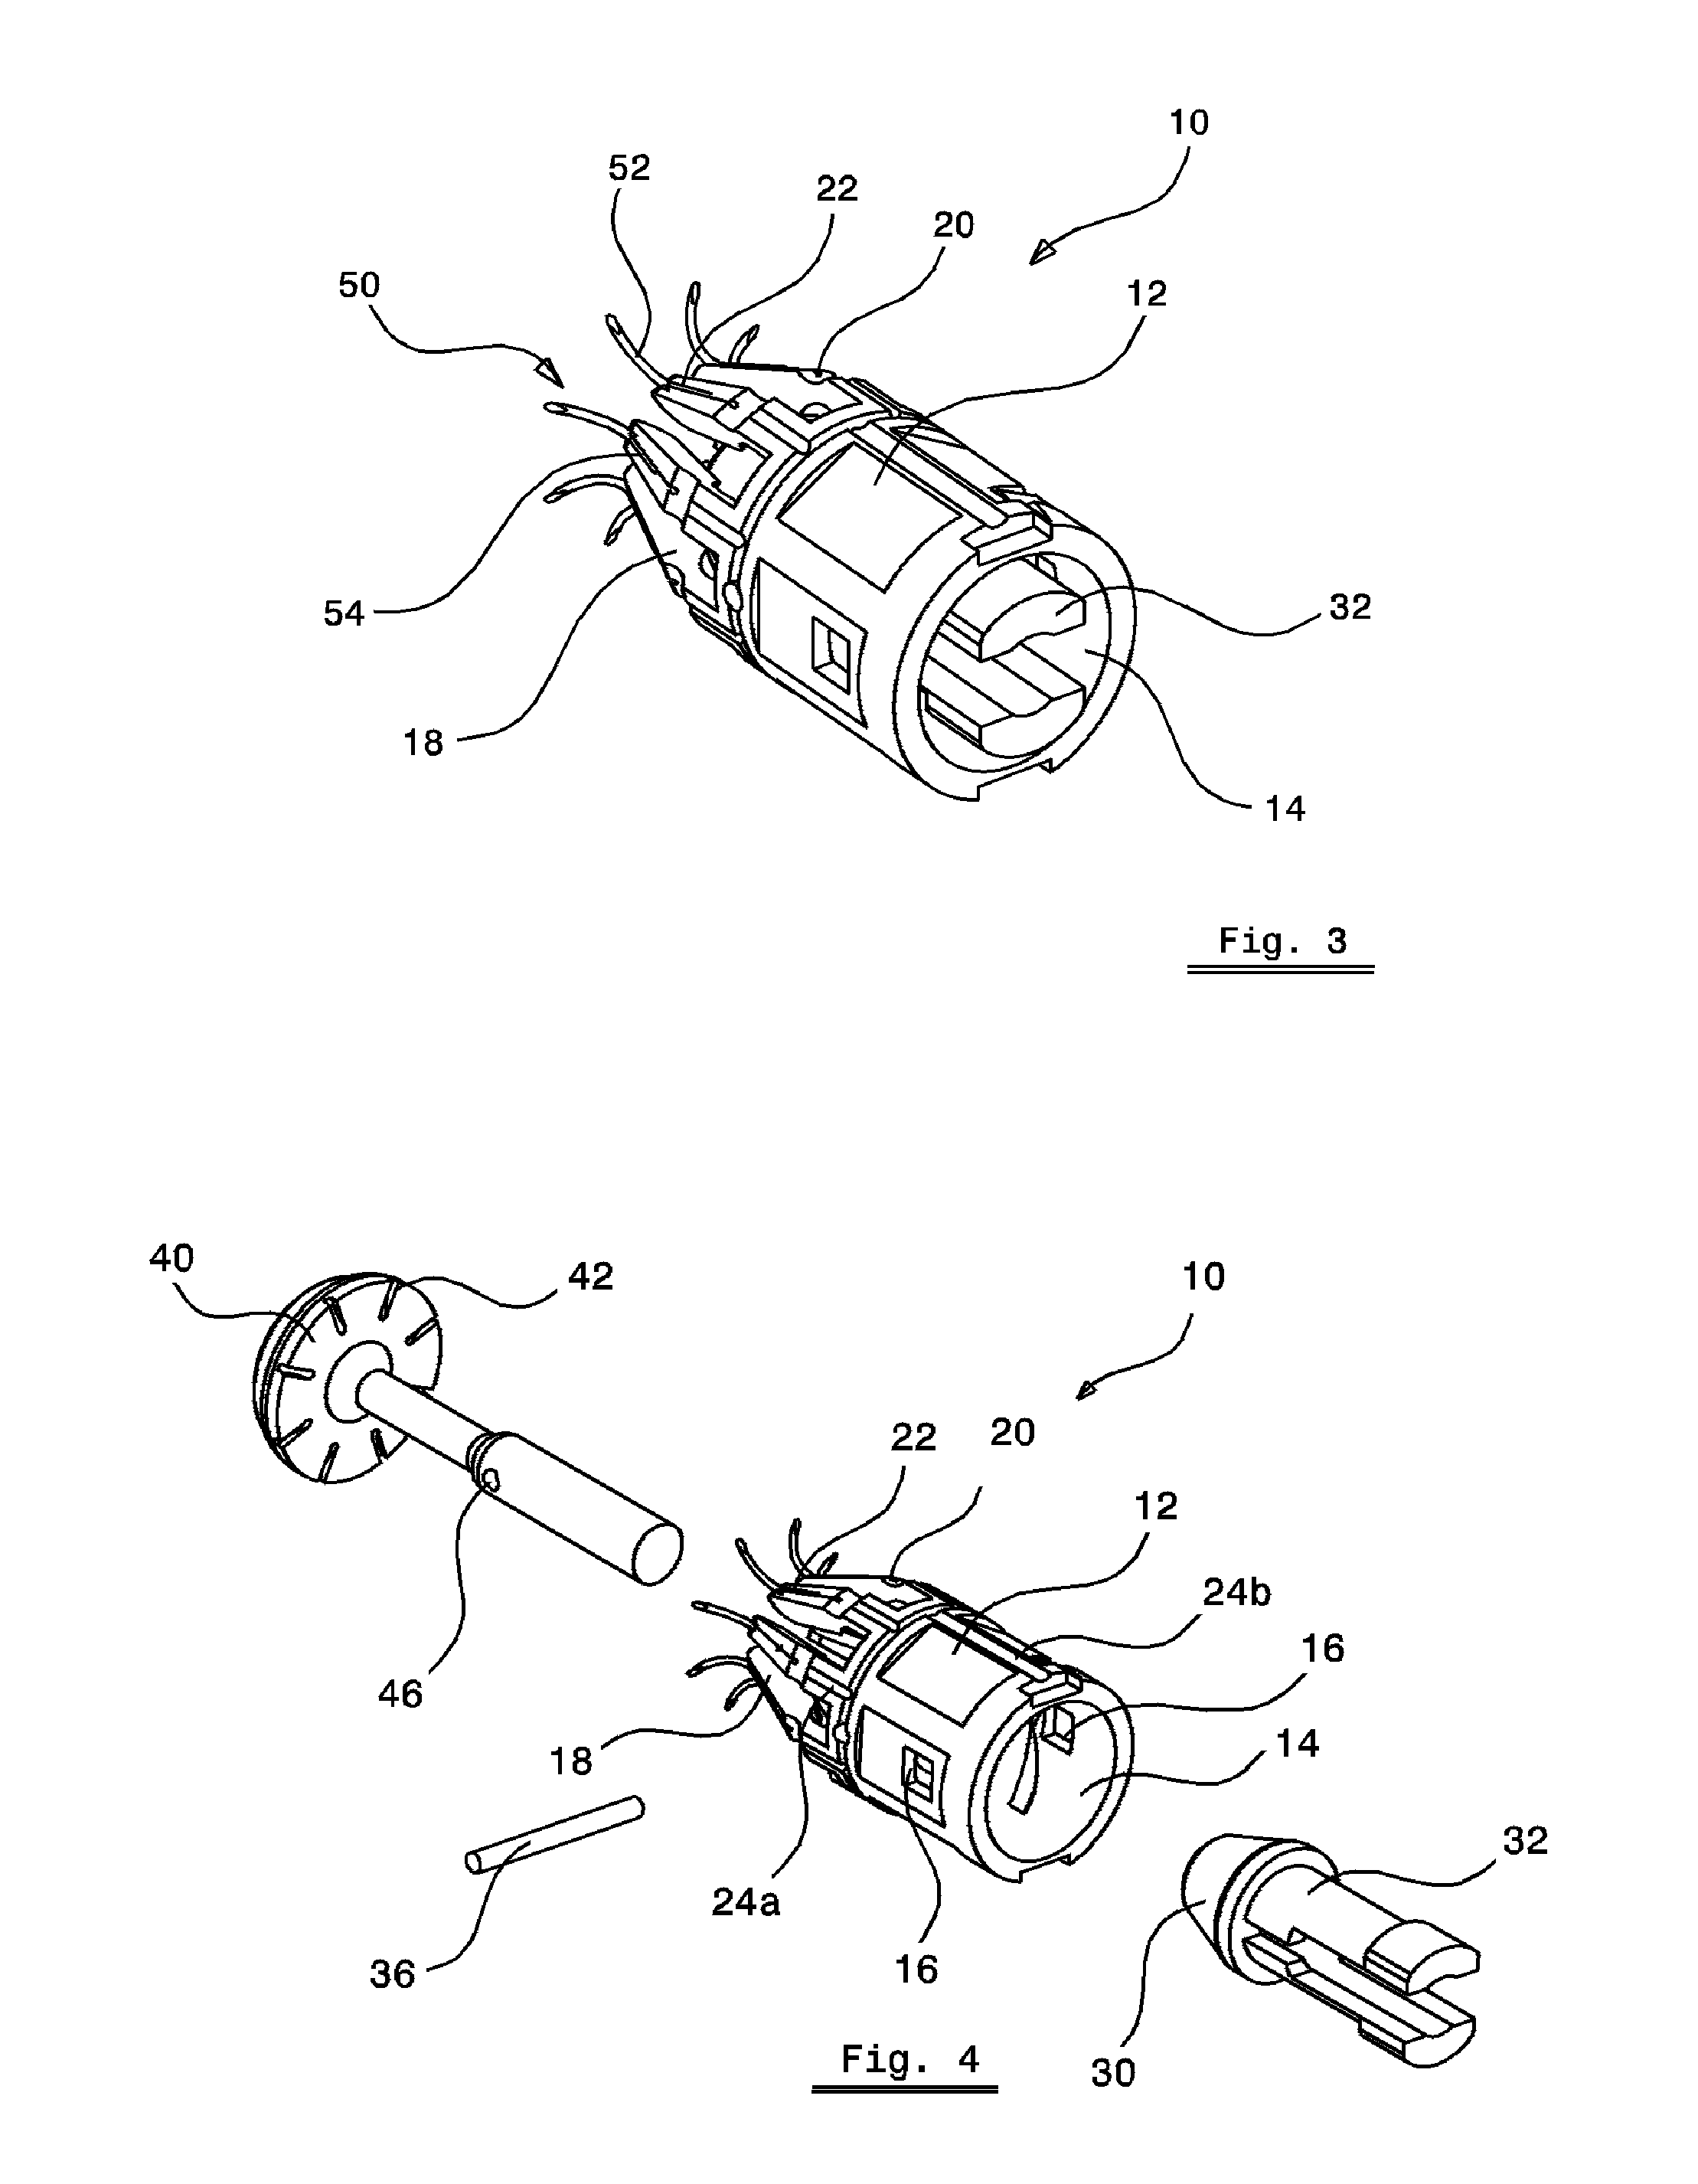 Device for performing end-to-end anastomosis